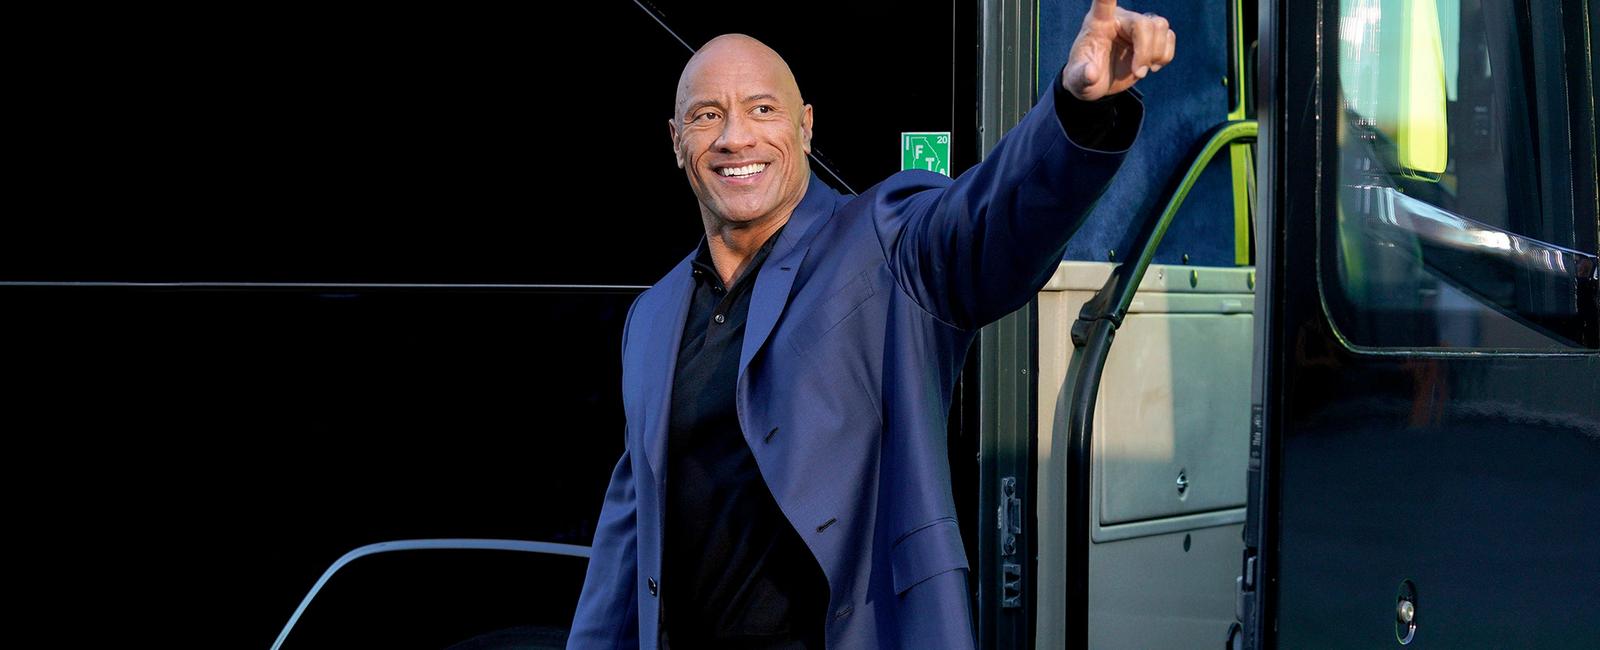 Dwayne the rock johnson was called dewey johnson by his former university of miami football teammates and they still call him that to this day